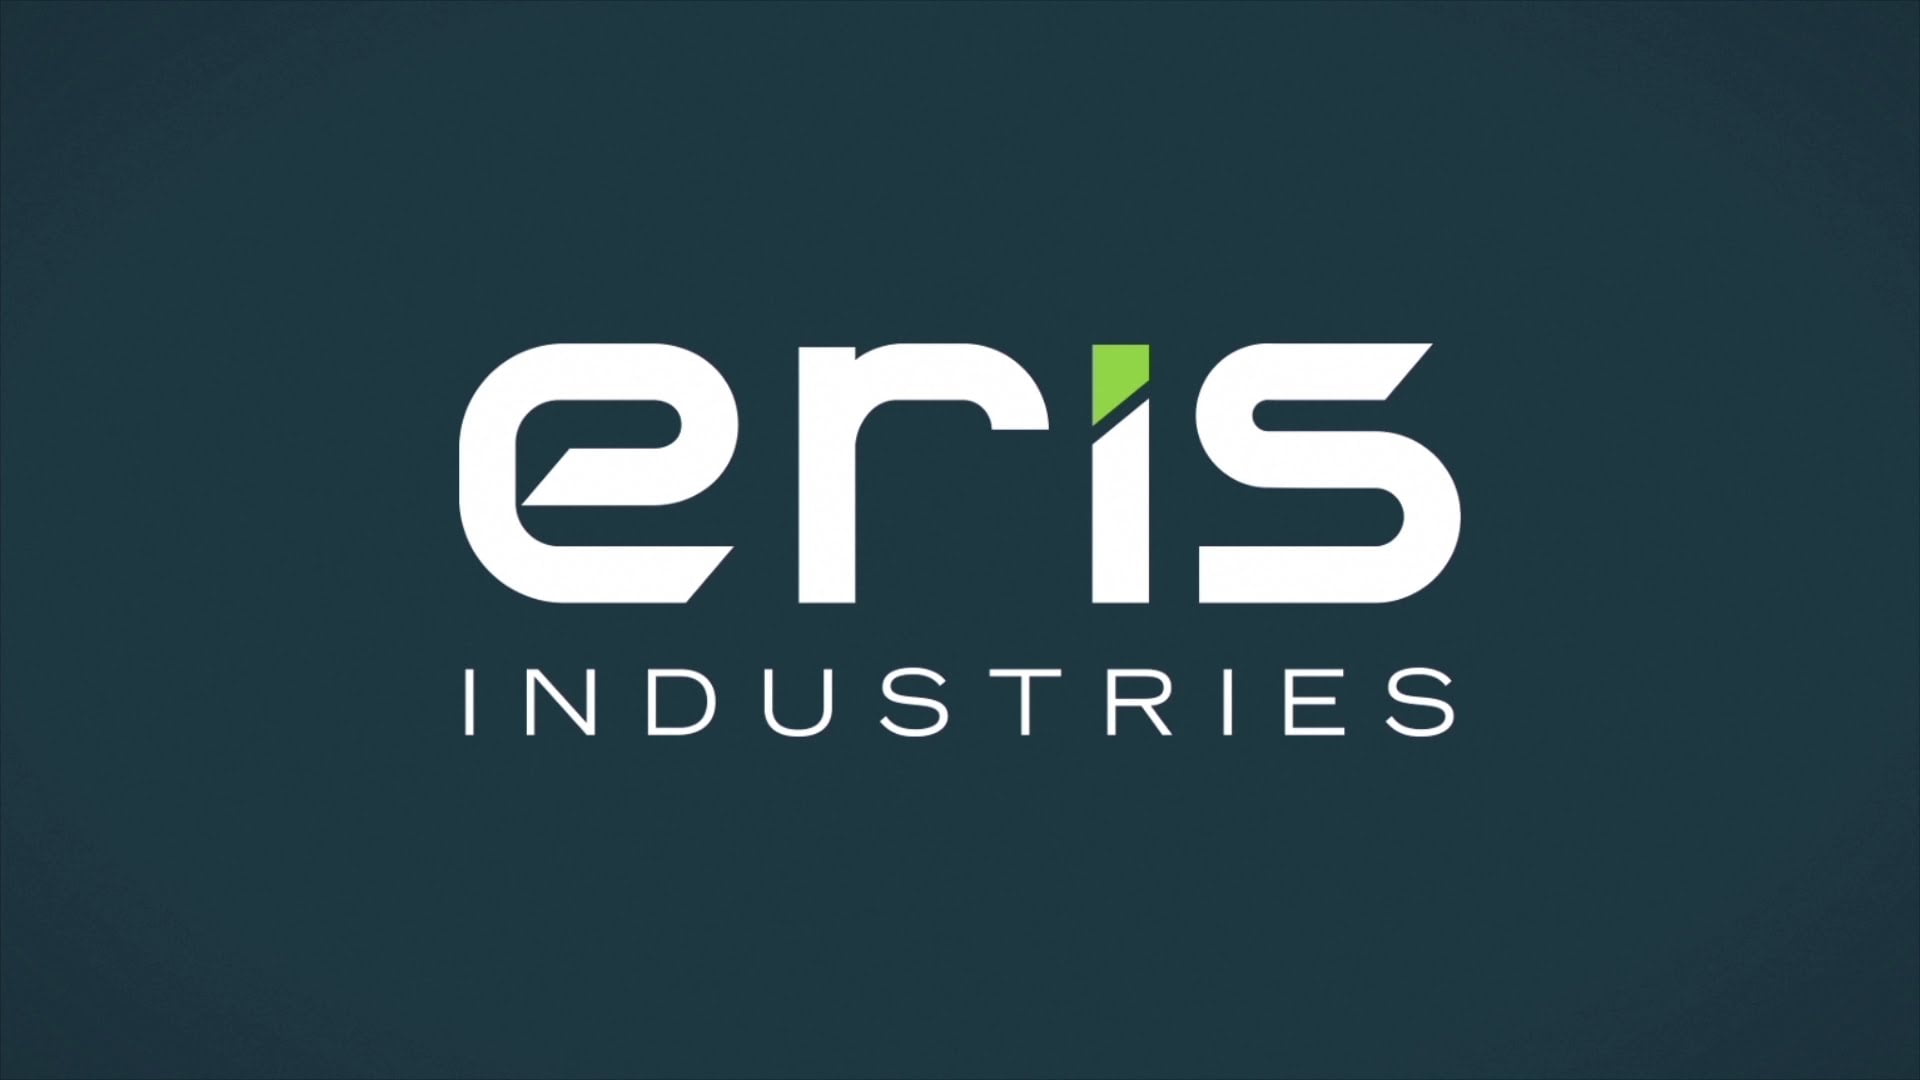 Eris Industries and Ledger Partners for a Secure Blockchain